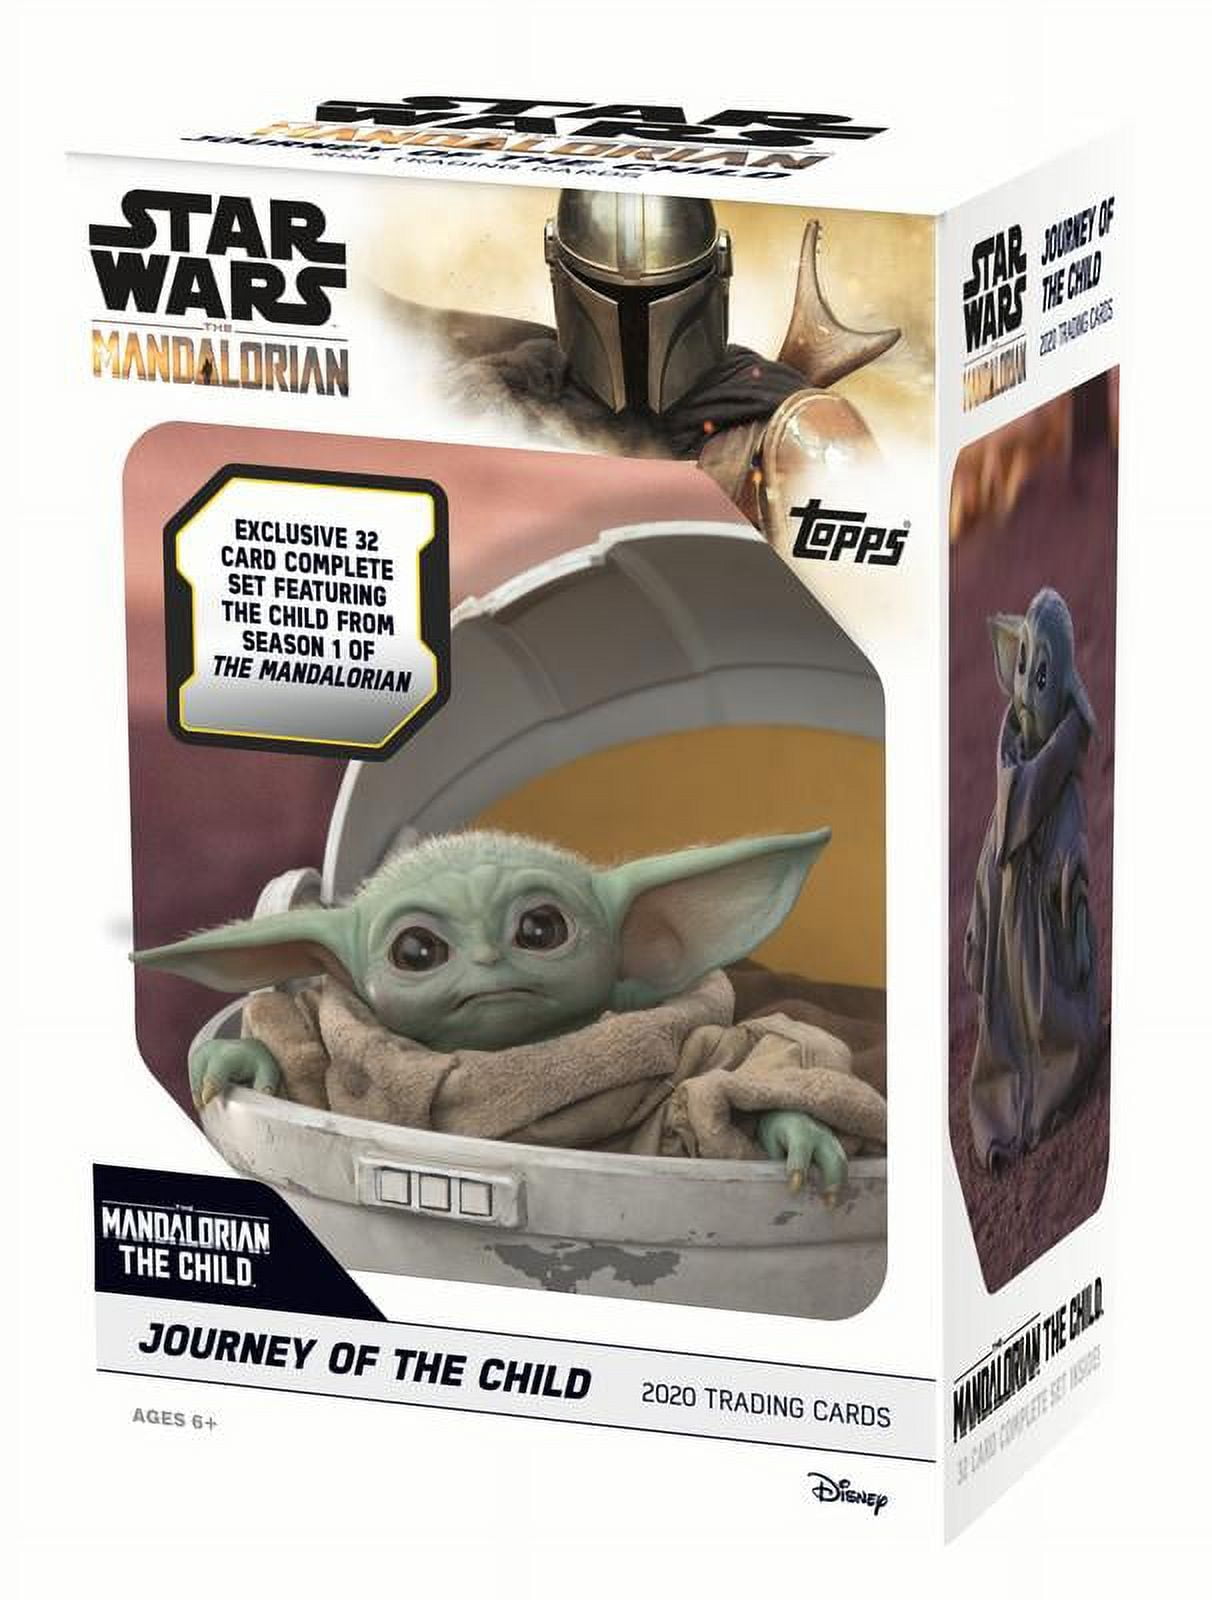 Baby Yoda TX - So the lady human planned to share this in the